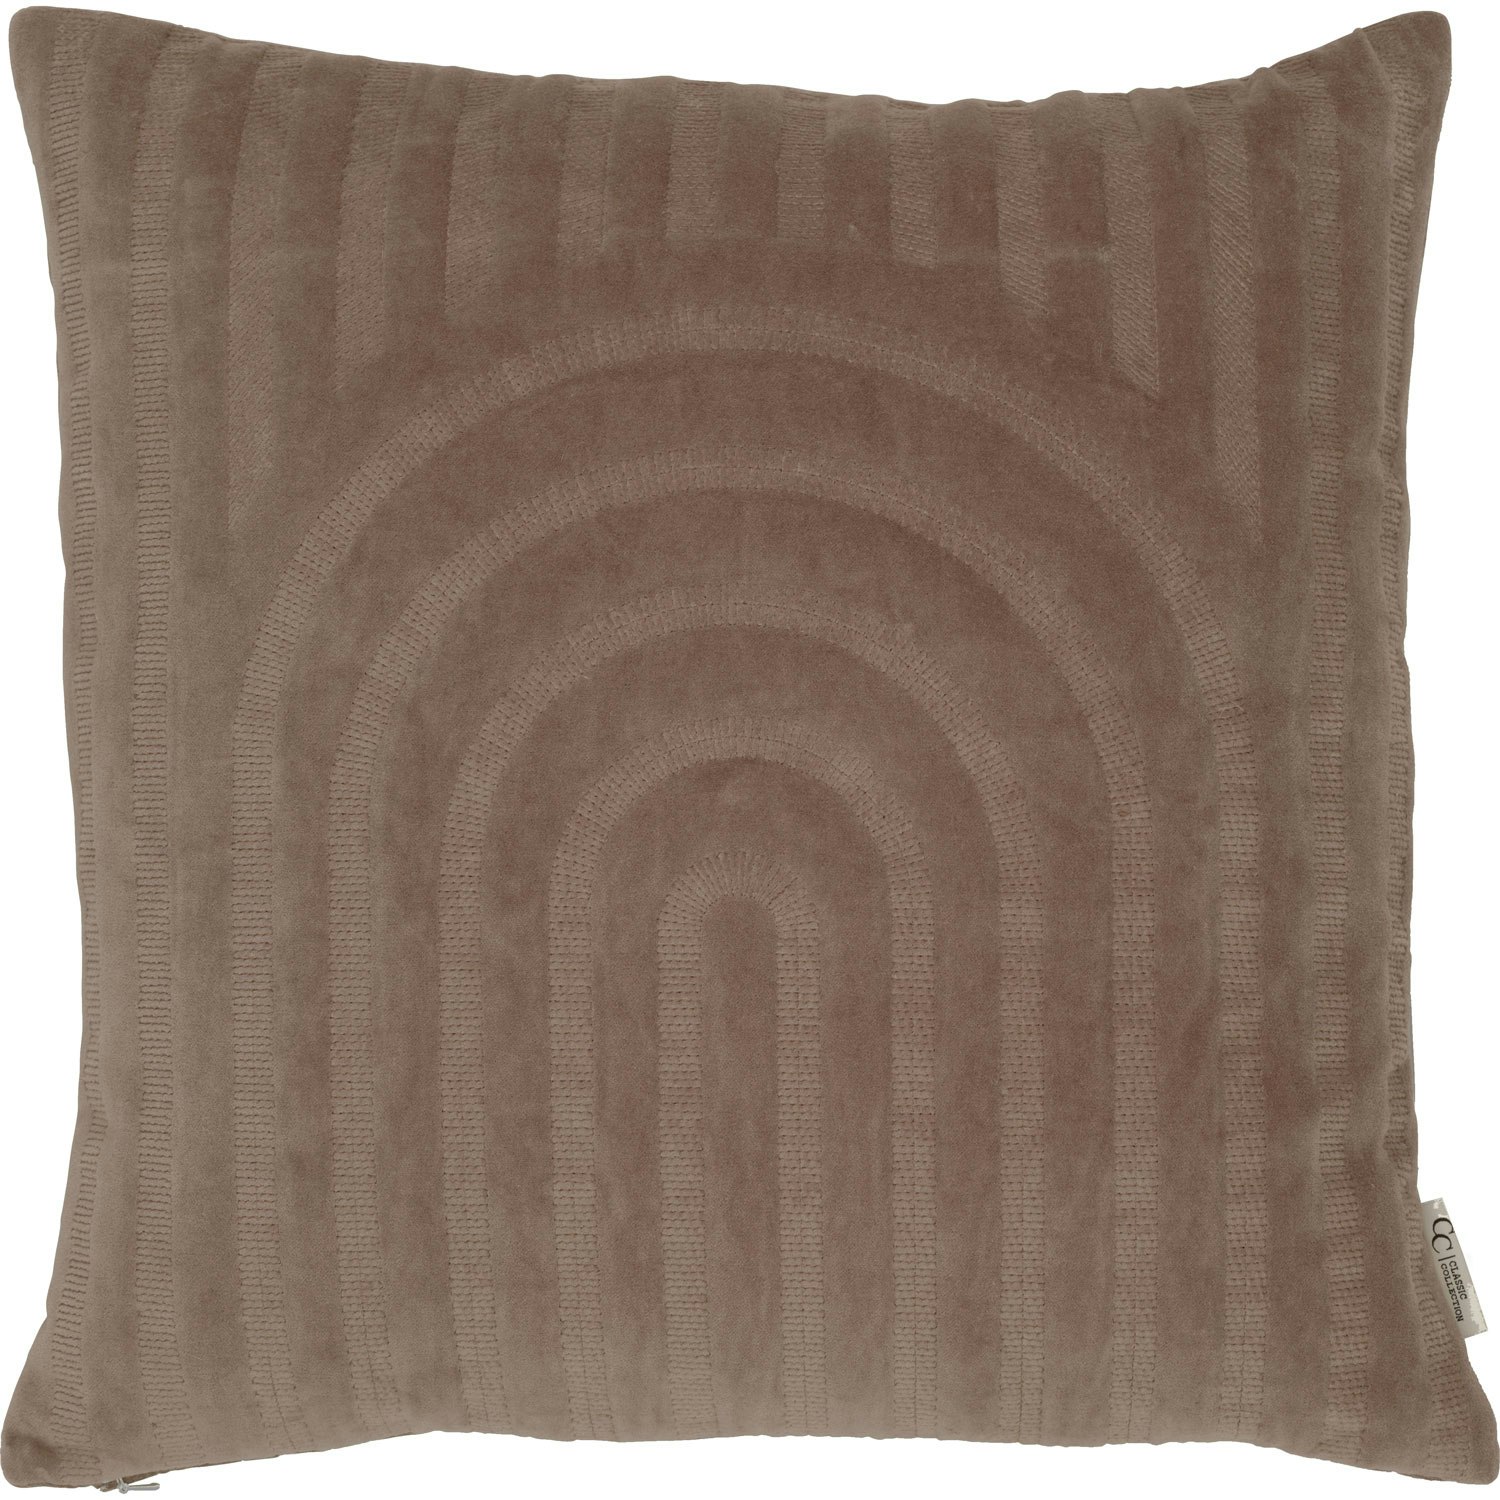 https://royaldesign.com/image/2/classic-collection-kuddfodral-arch-50x50-desert-taupe-4